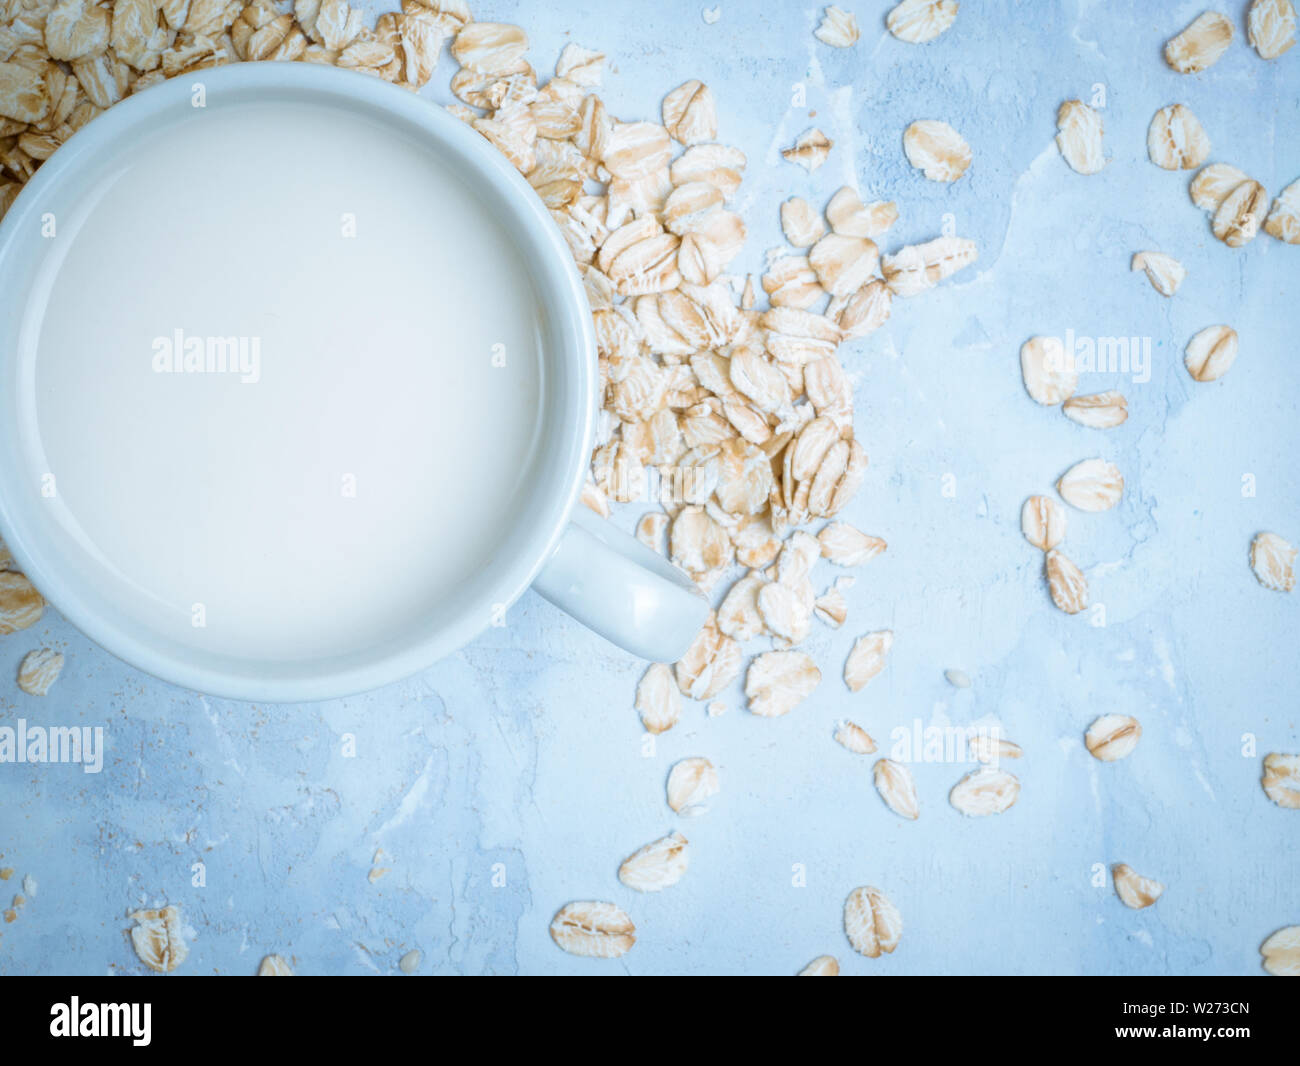 Oat milk drink in white cup and cereal flakes on kitchen bench. Flat lay. Copy space. Stock Photo